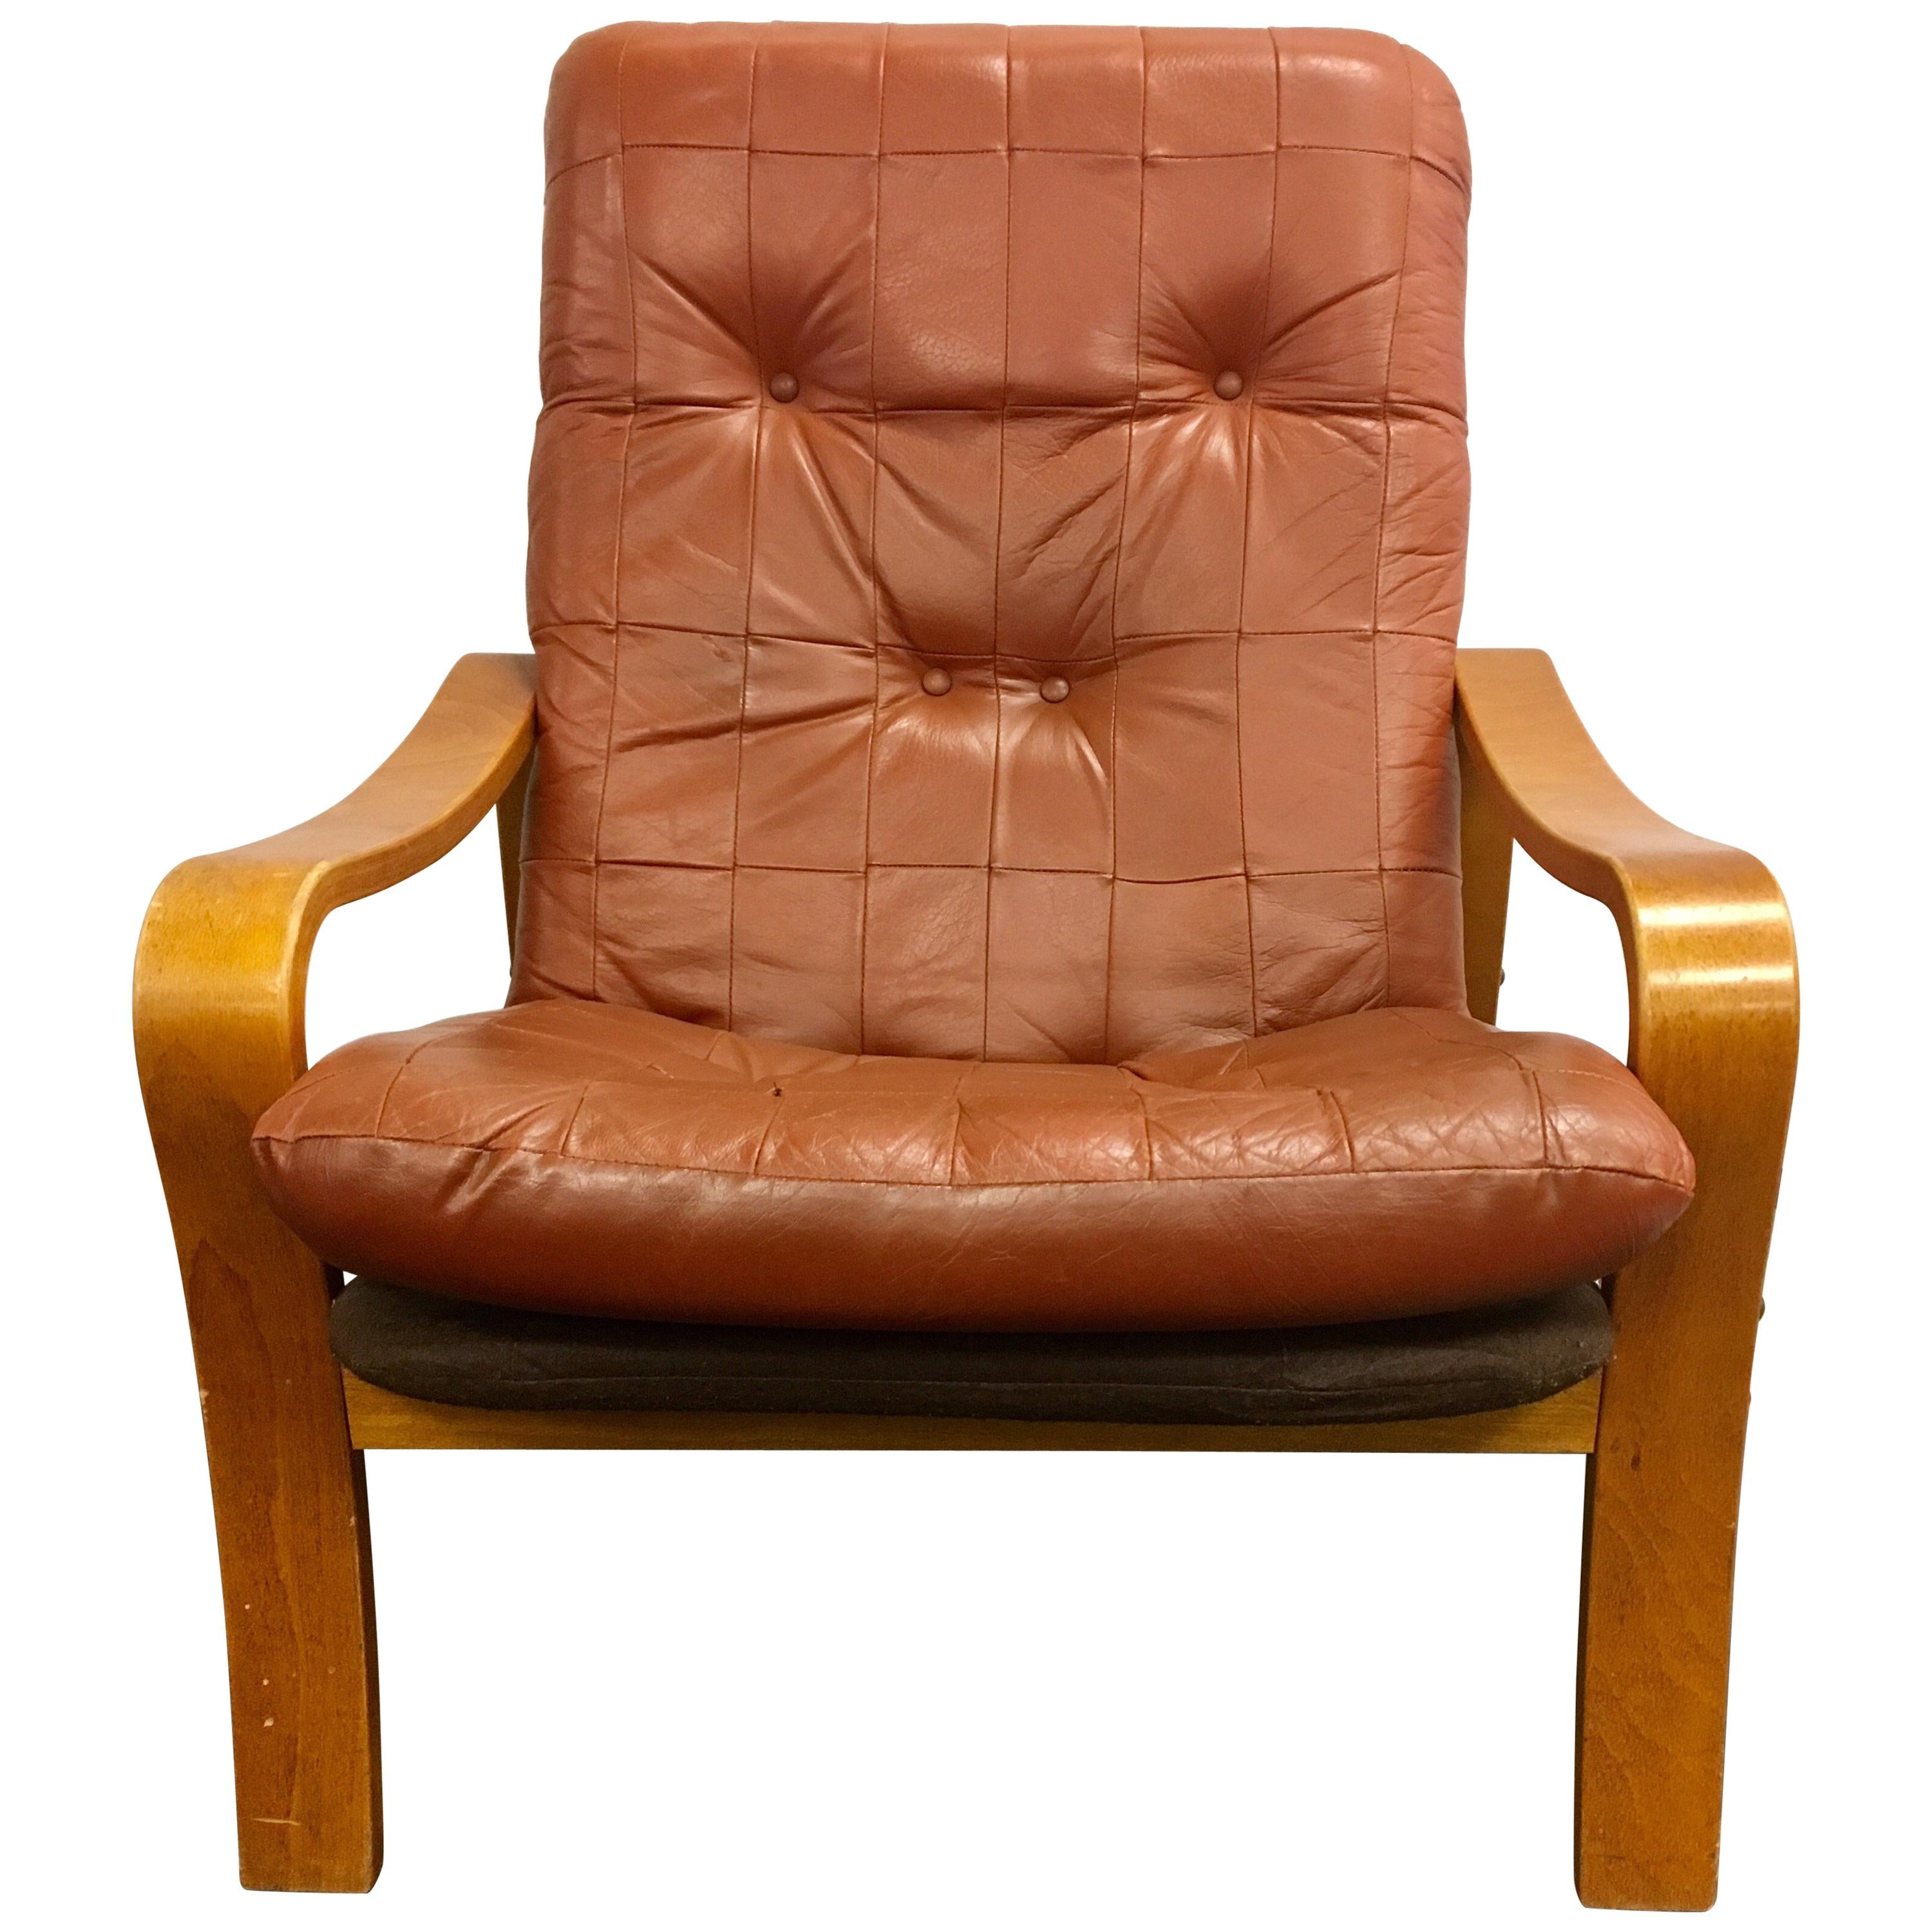 Danish Modern Teak and Tufted Leather Lounge Chair